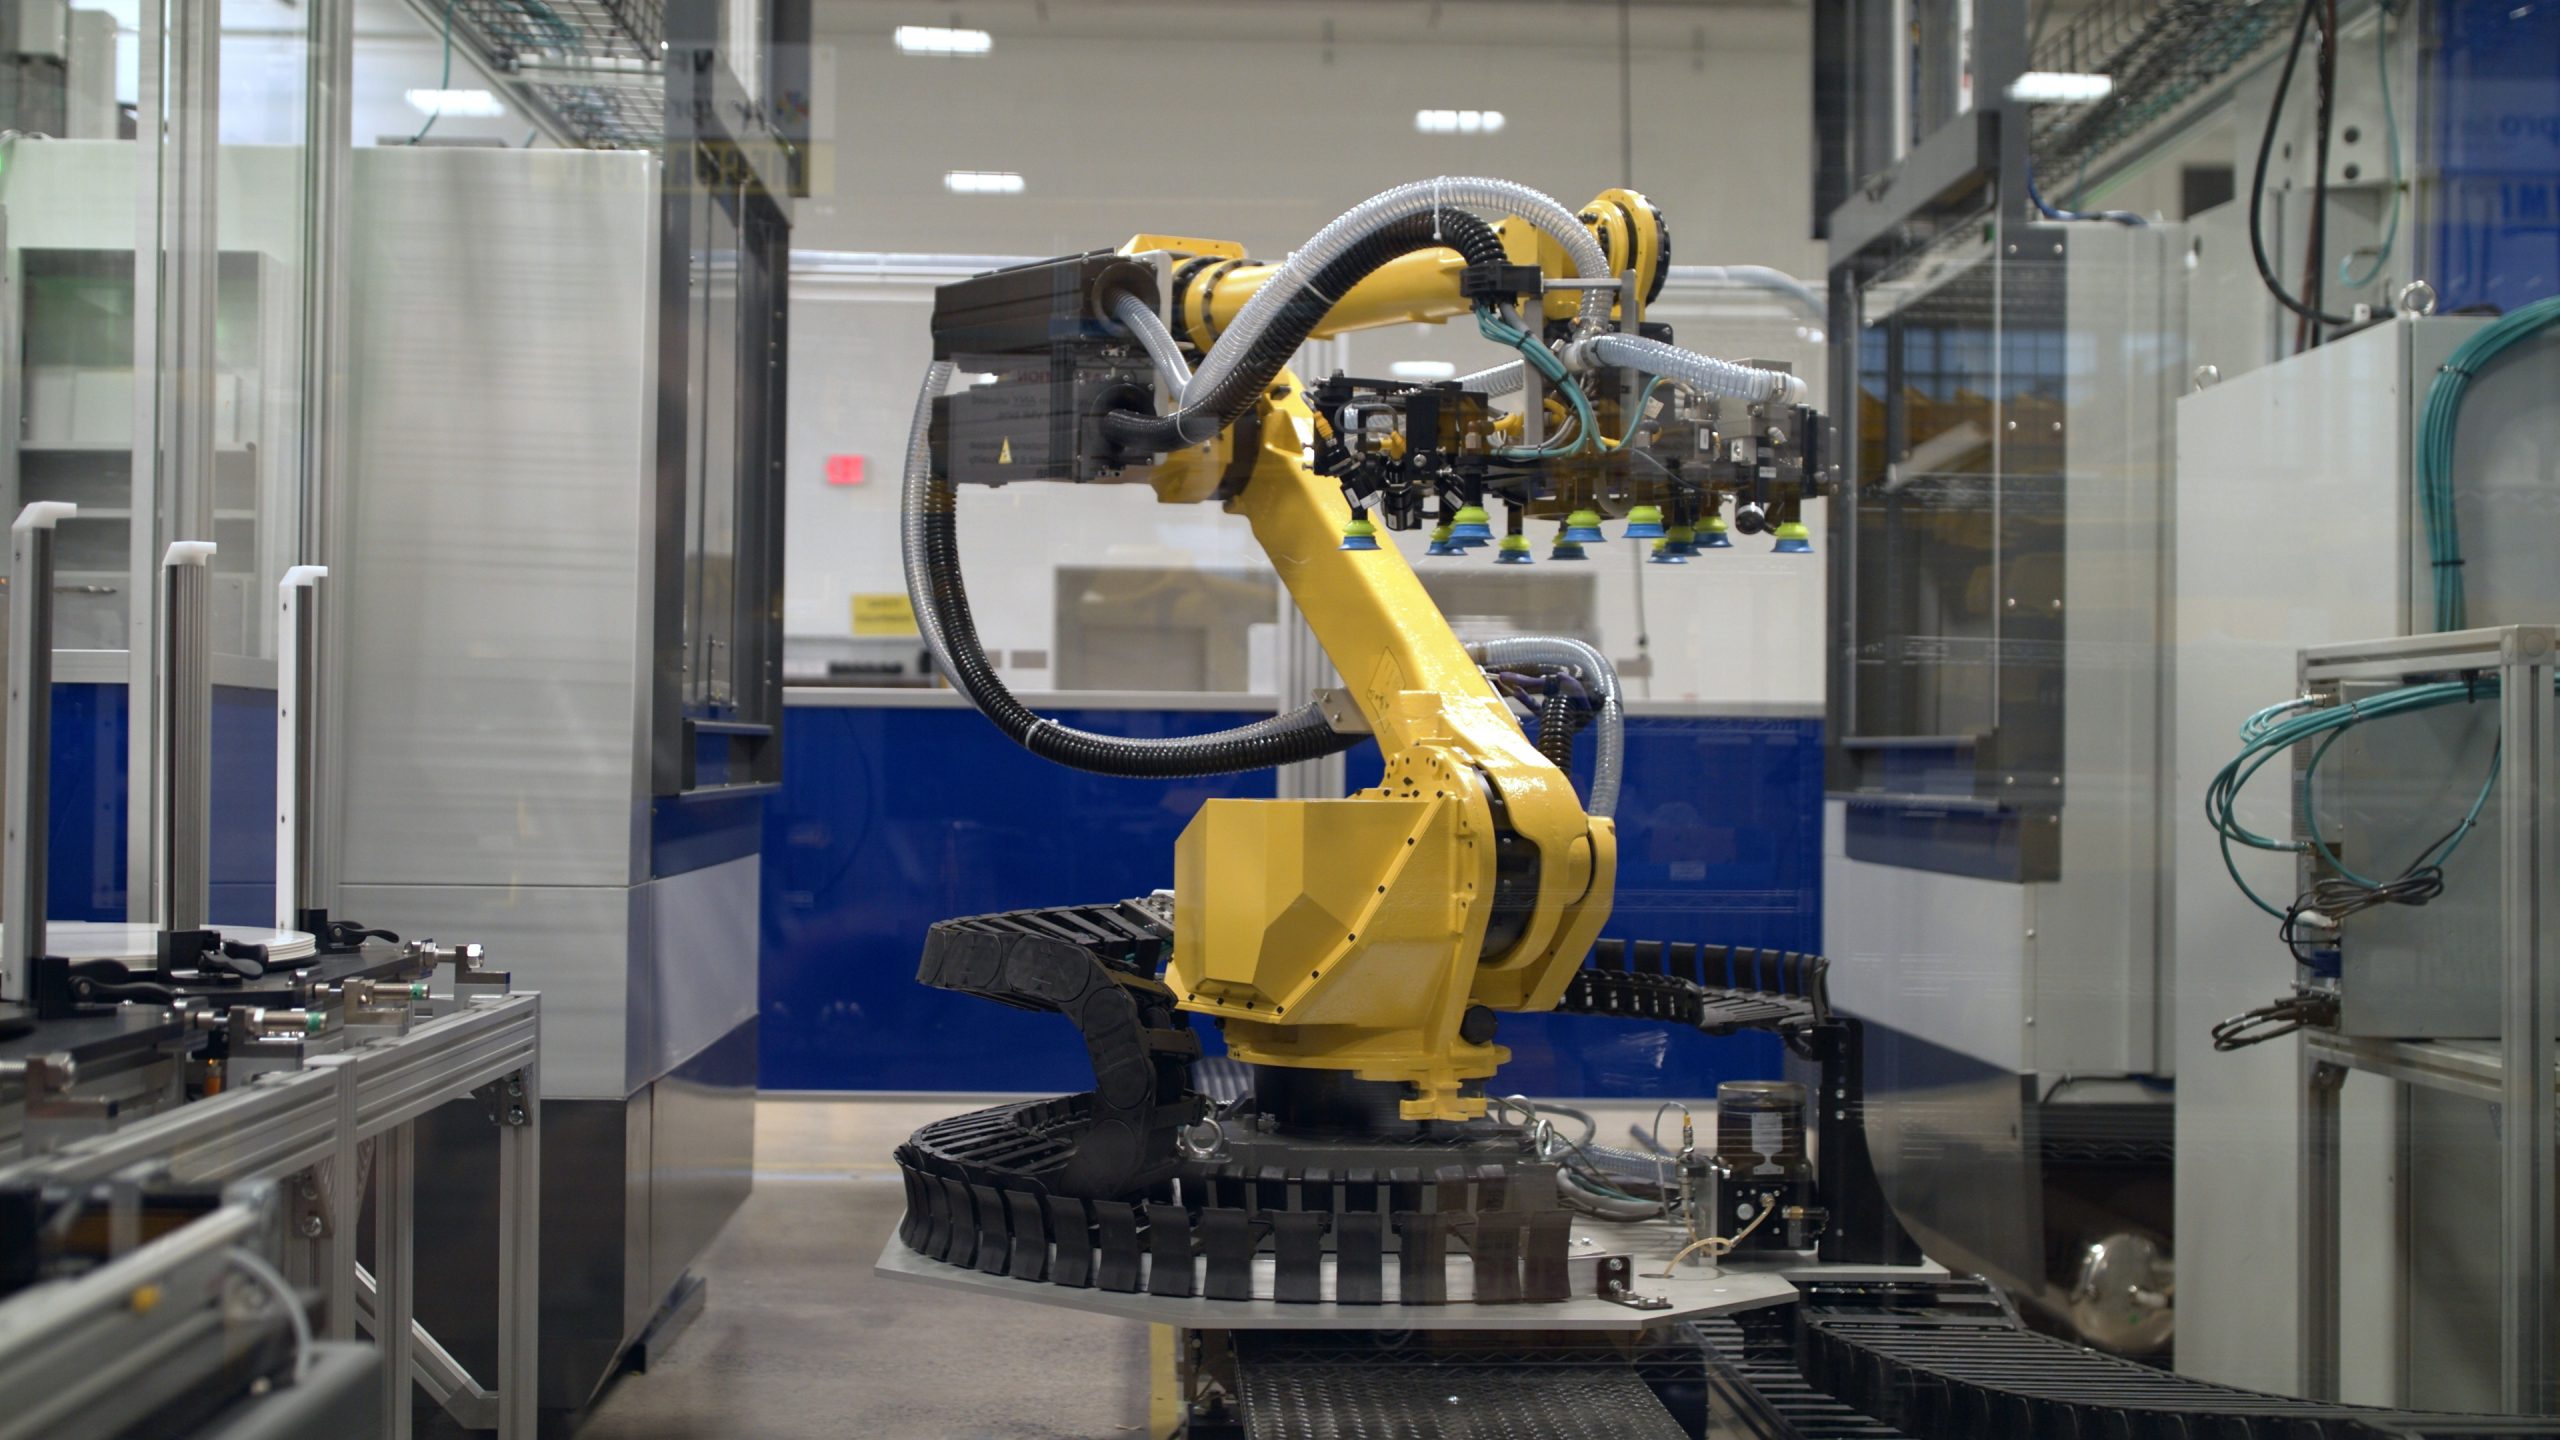 Six-axis robot with multiple degrees of freedom and EOAT moves material between process modules.